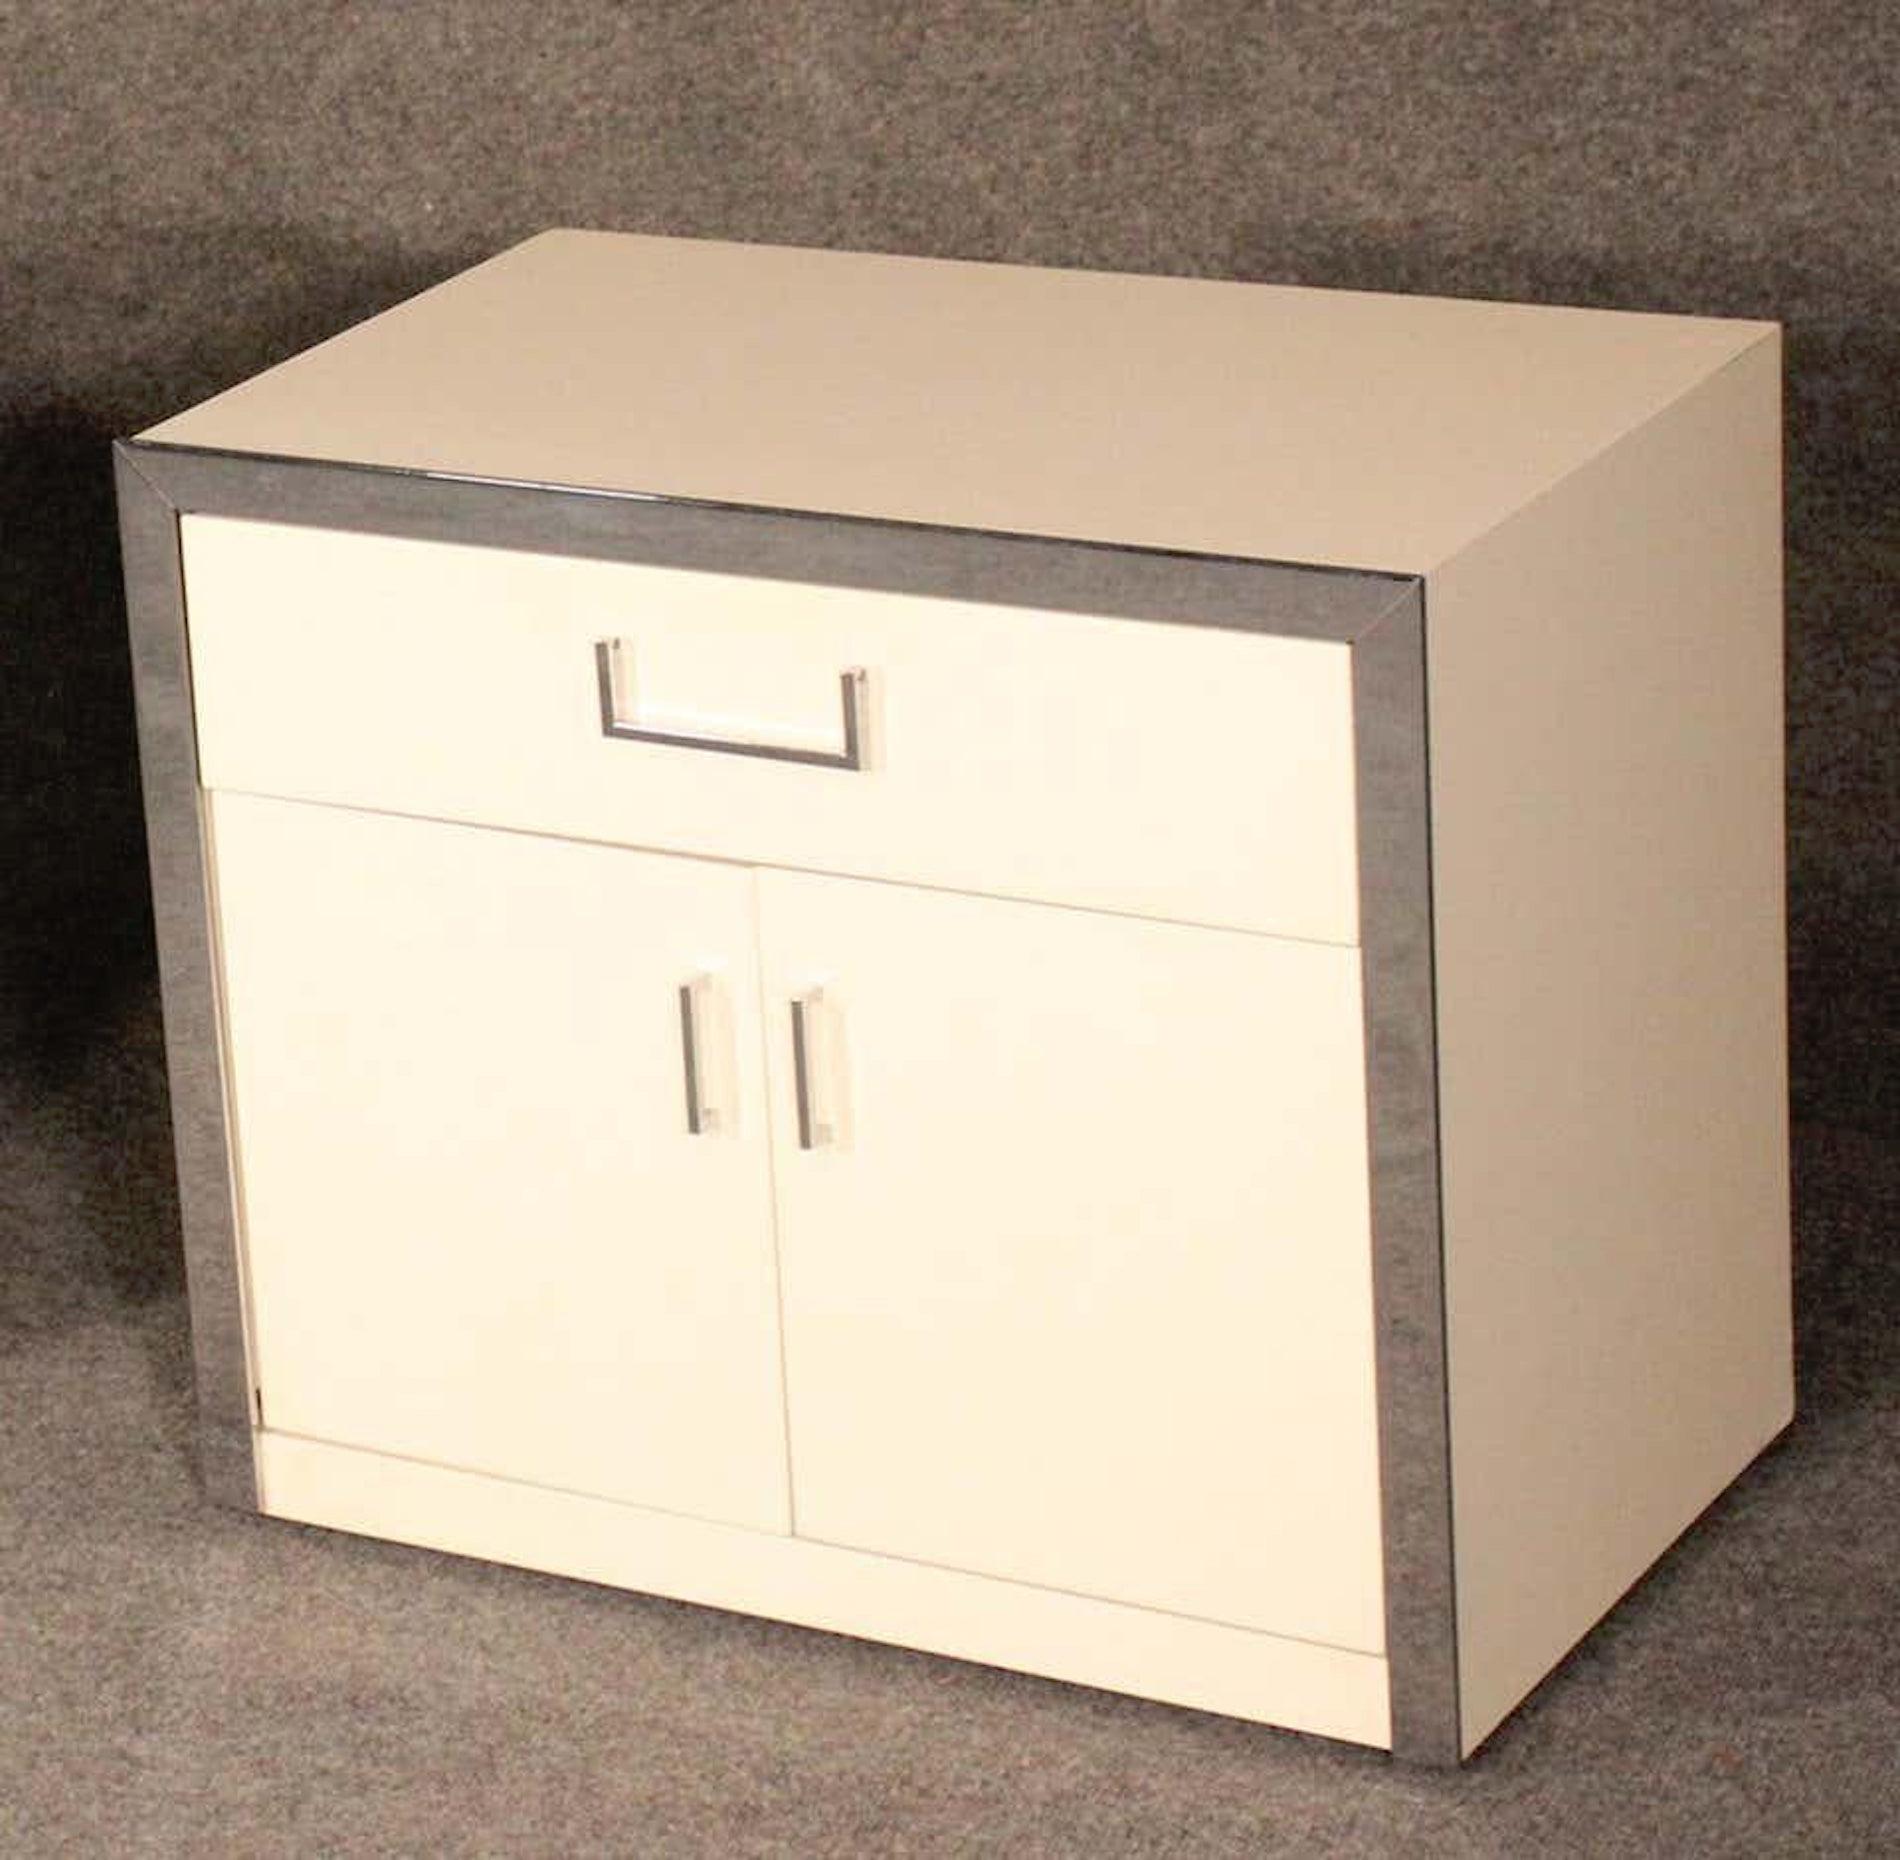 Mid-Century Modern nightstands in white with polished chrome hardware.
(Please confirm item location - NY or NJ - with dealer).
    